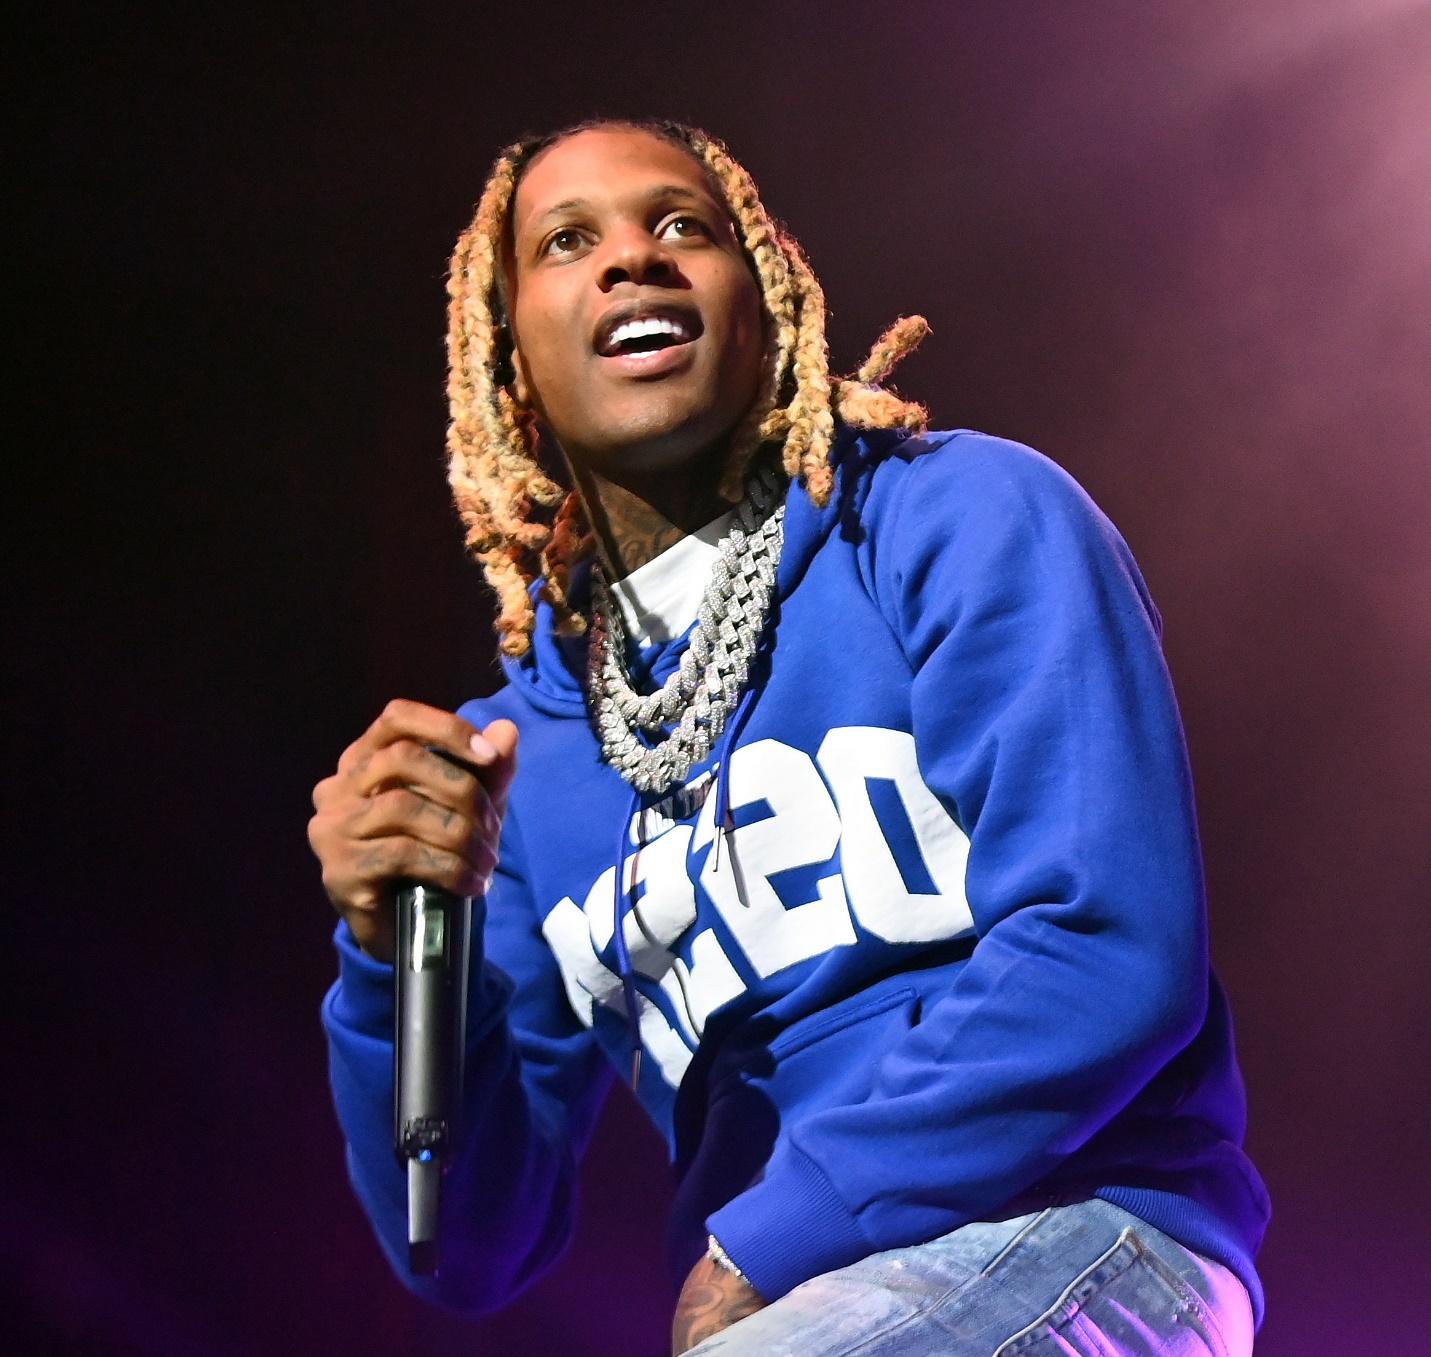 Rapper Lil Durk performs onstage during his tour, The 7220 tour, at Coca-Cola Roxy on April 20, 2022, in Atlanta, Georgia